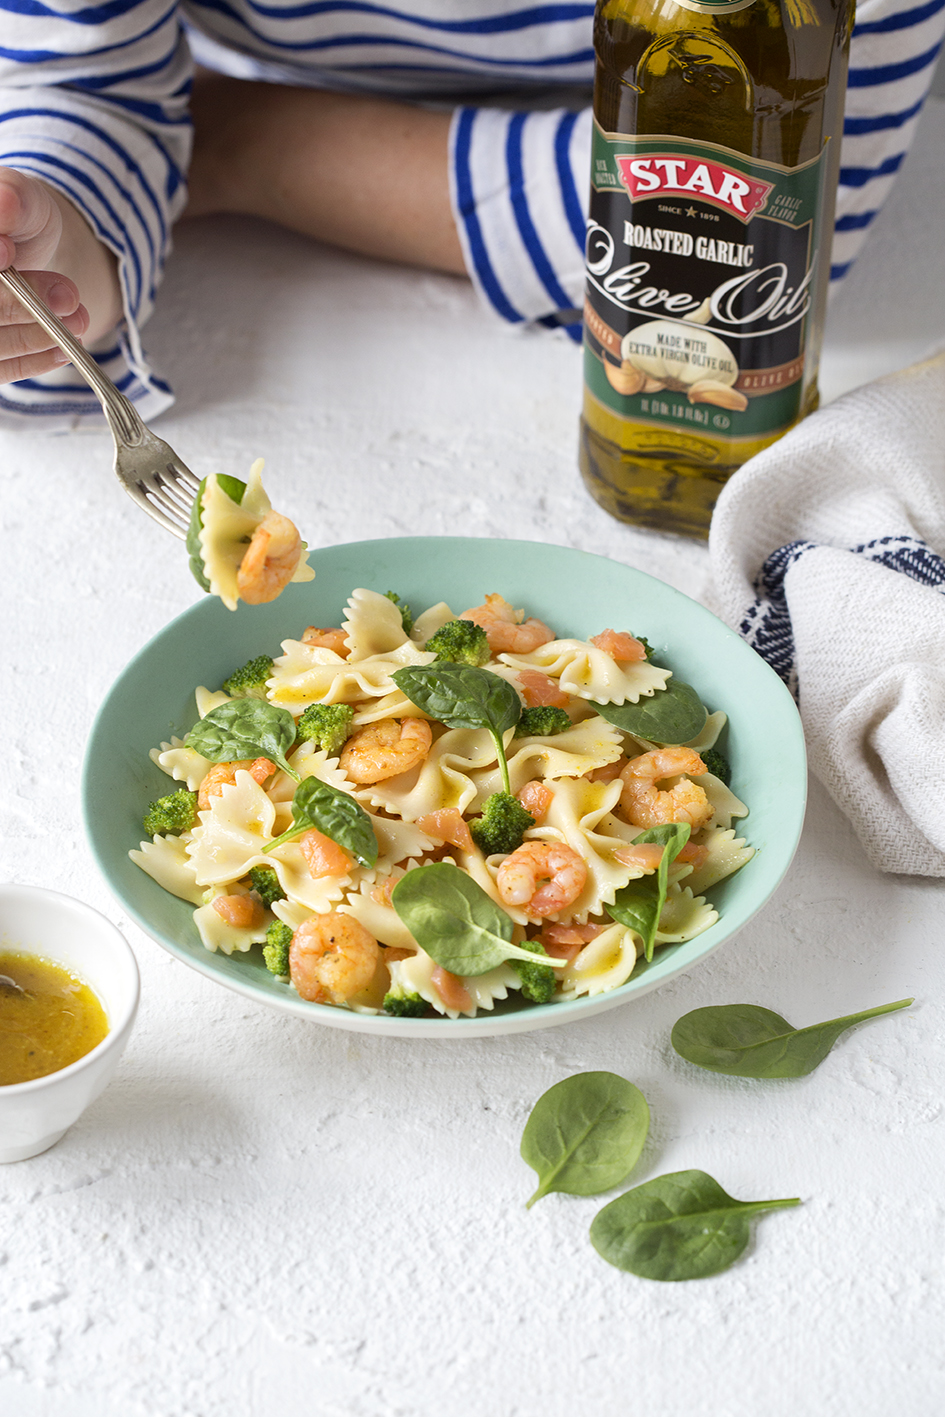 Who ever said a simple pasta salad couldn’t be delicious deli dish? #STARFineFoods